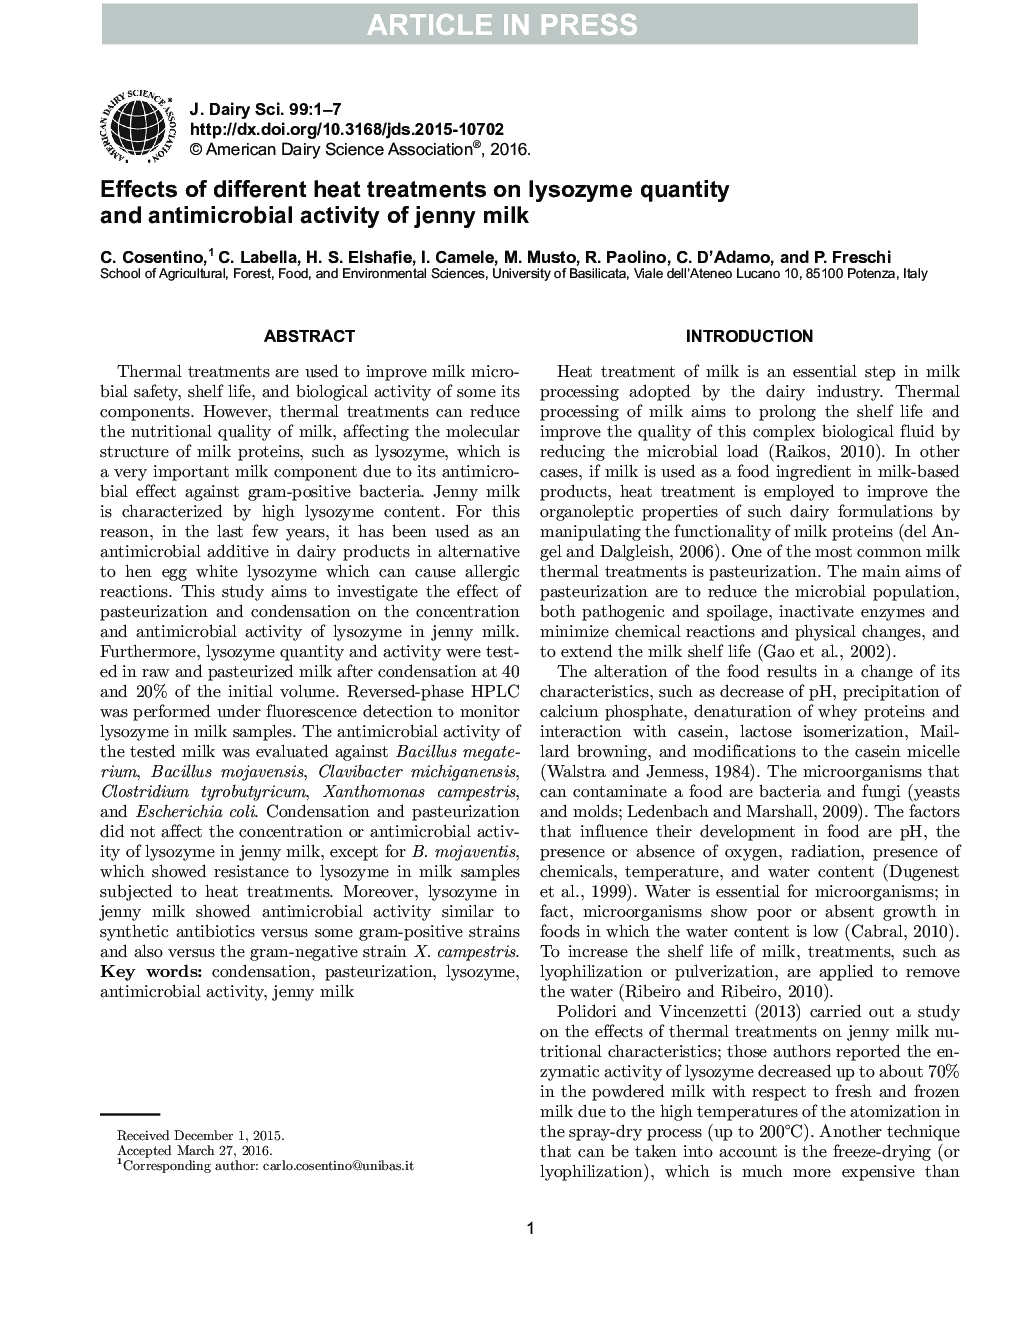 Effects of different heat treatments on lysozyme quantity and antimicrobial activity of jenny milk